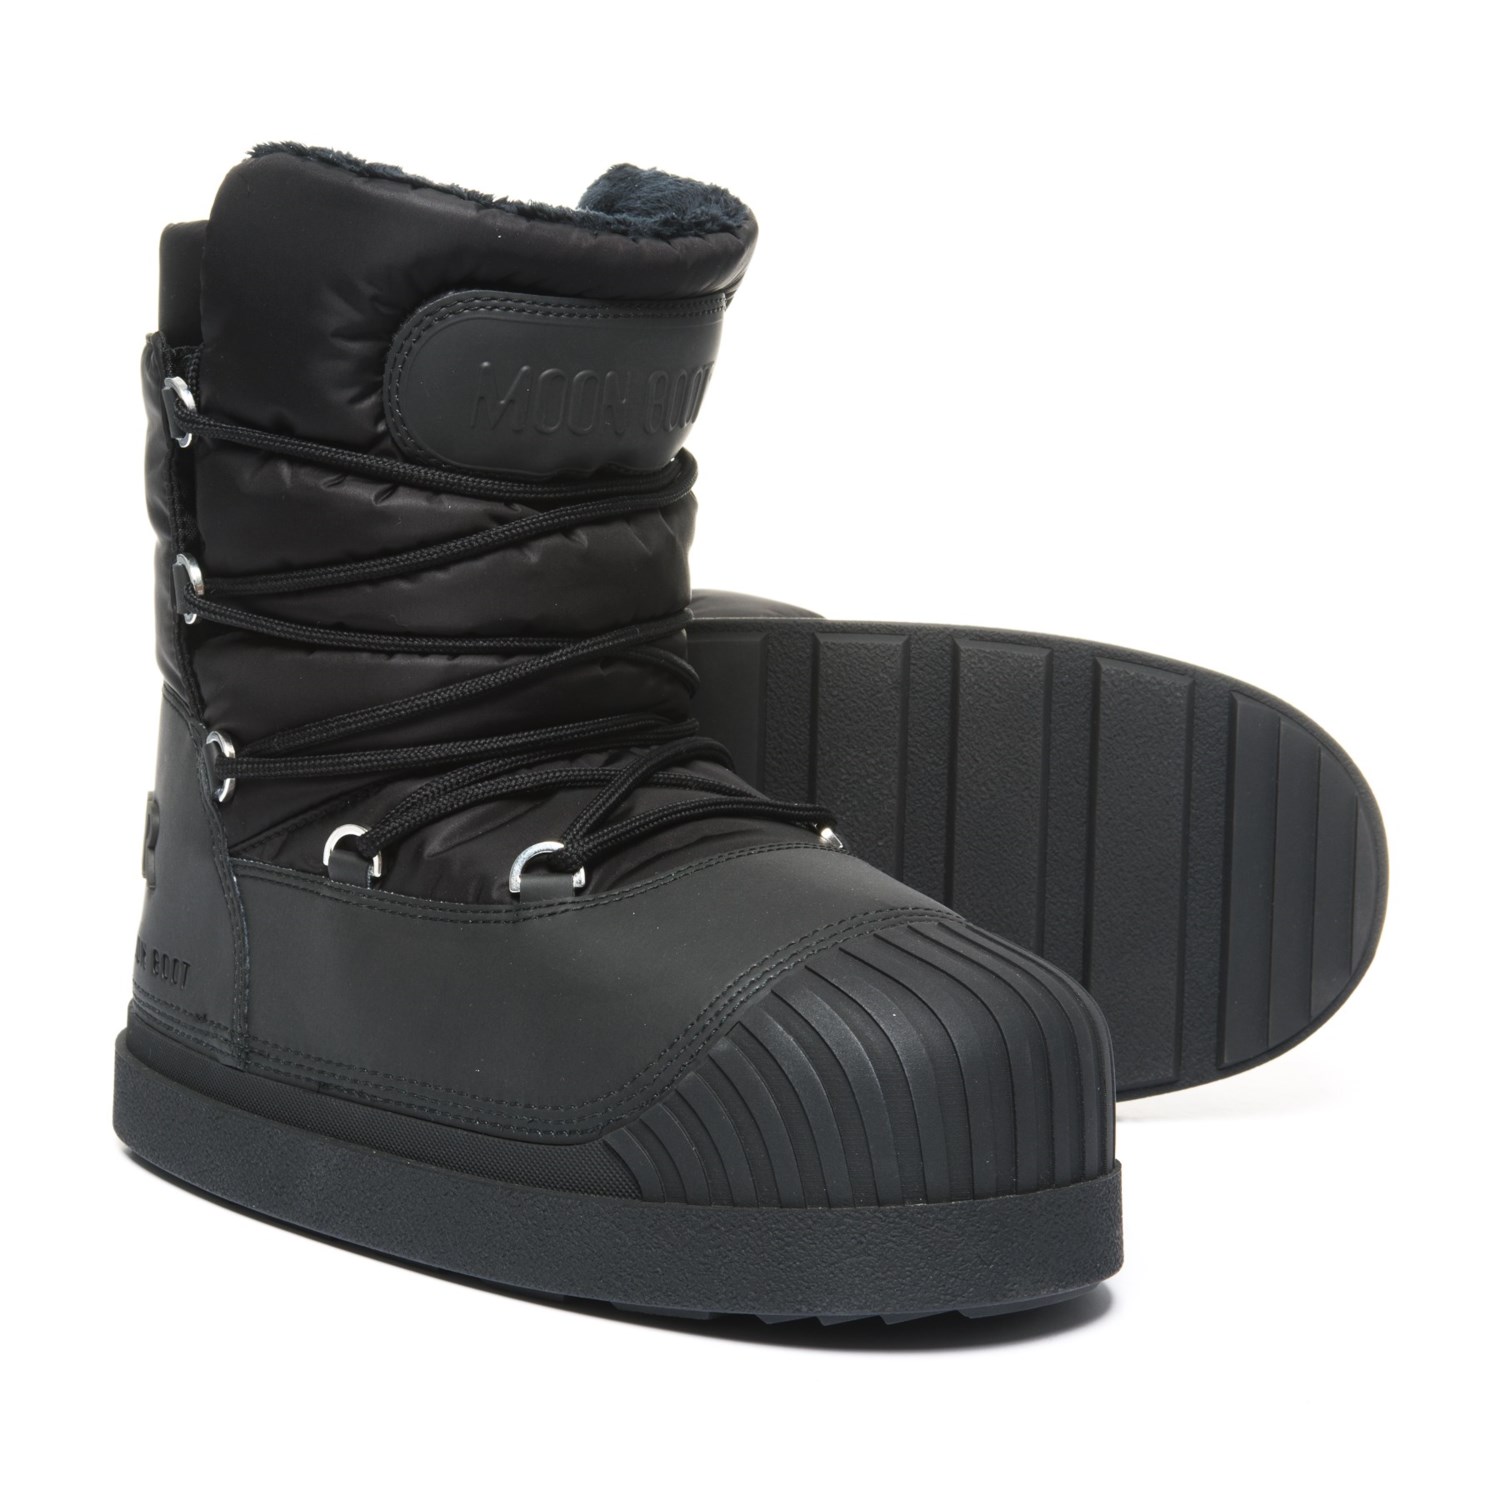 Moncler Winter Boots – Waterproof, Insulated (For Men)